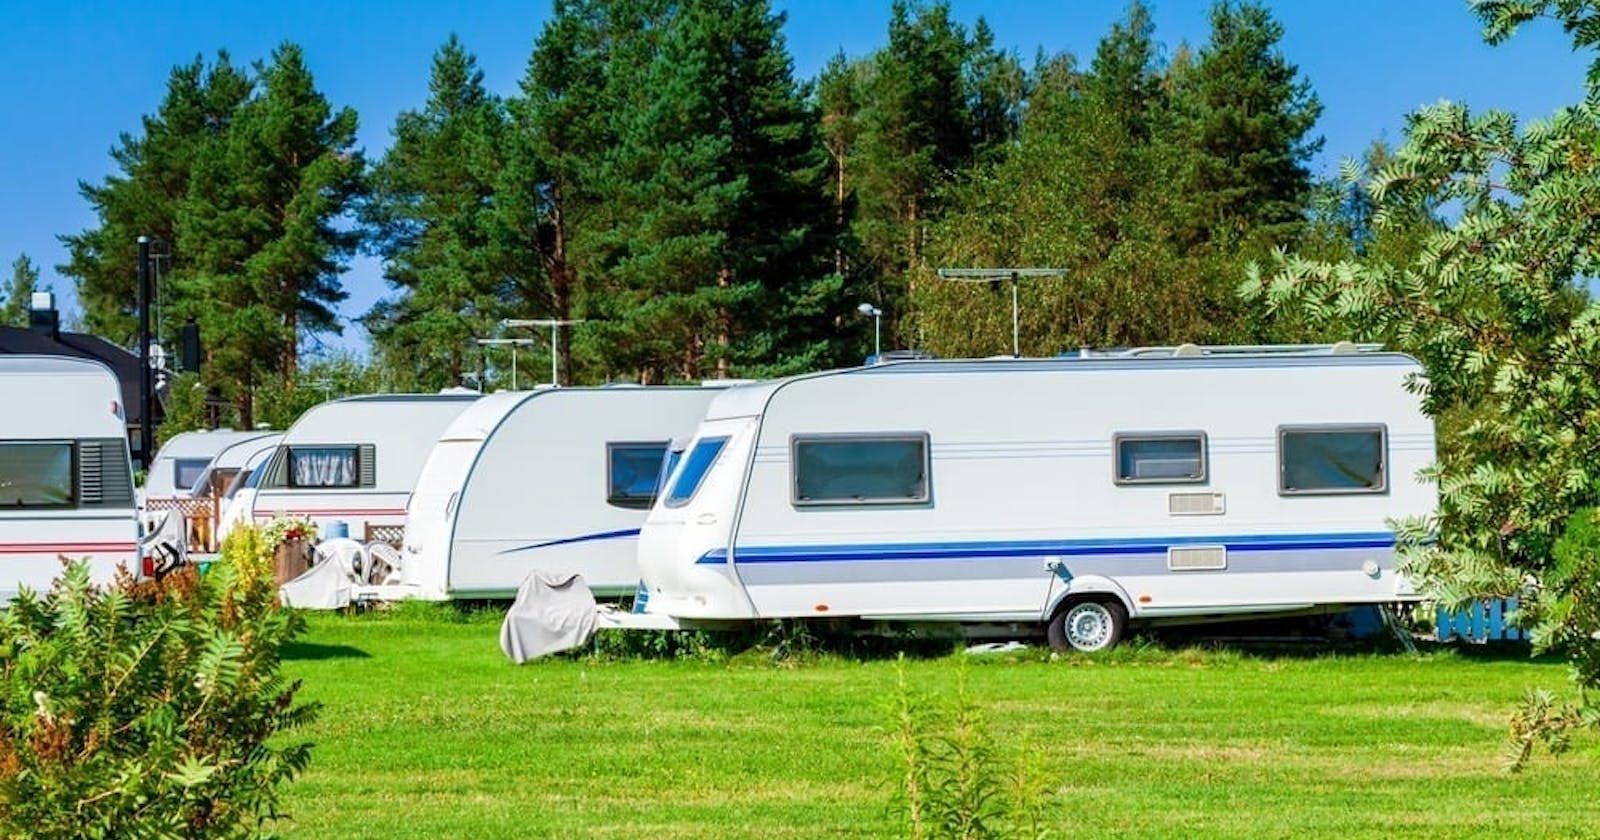 Camper Trailer Accessories: What You Need to Make Camping More Enjoyable